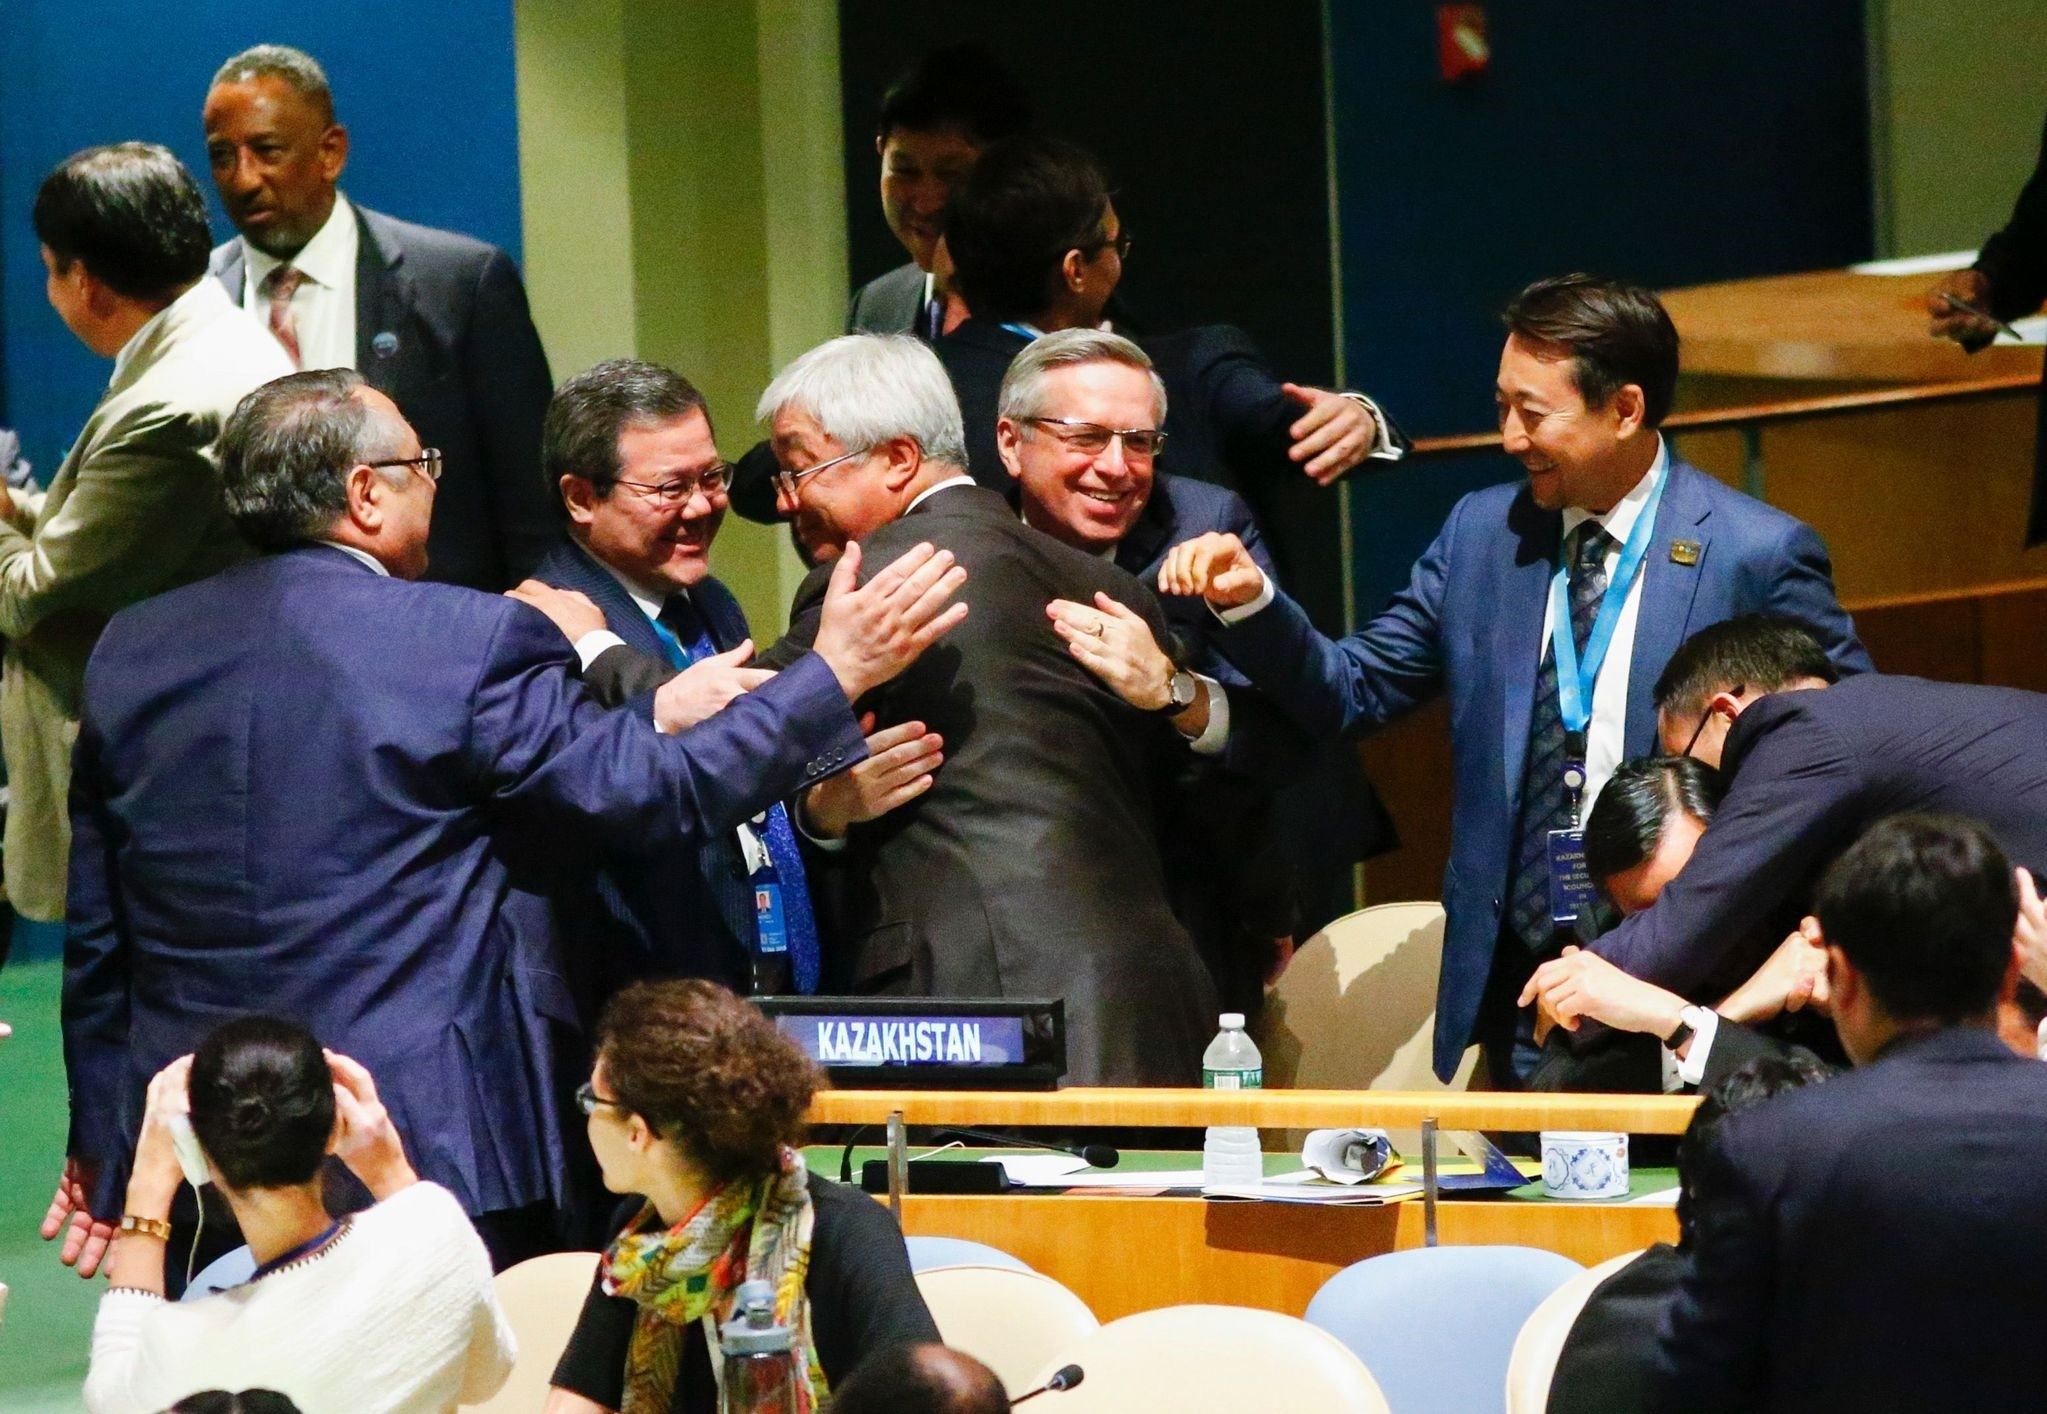 Kazakhstan's FM Erlan Idrissov (C) reacts after Kazakhstan won a seat during the Election of five non-permanent members of the Security Council at the United Nations in New York on June 28 2016. (AFP Photo)